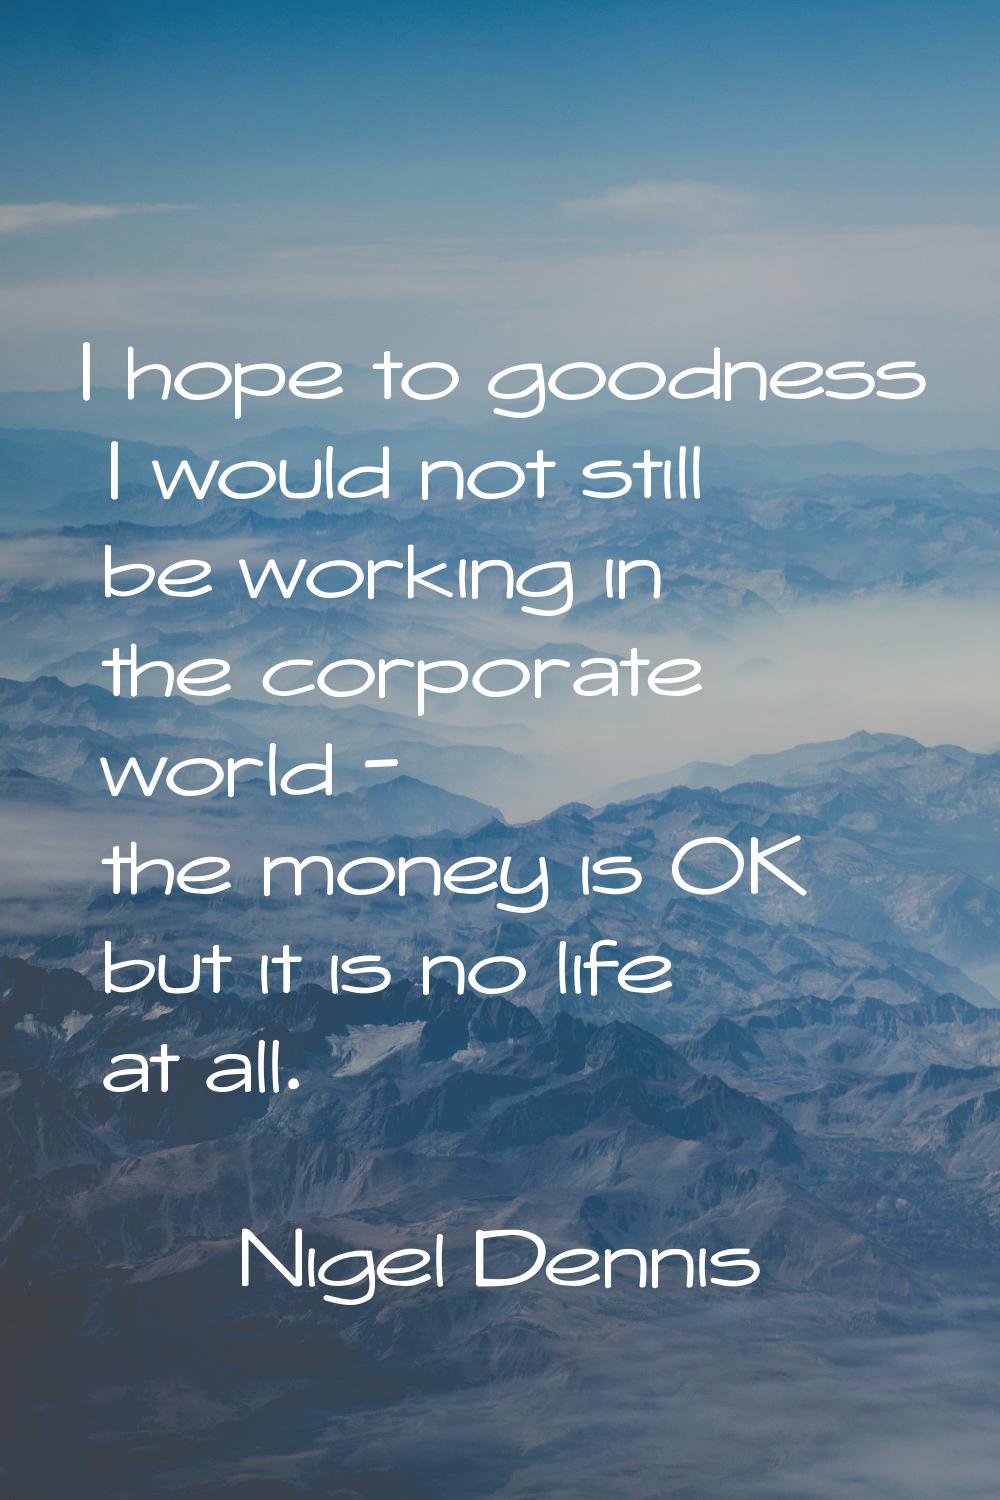 I hope to goodness I would not still be working in the corporate world - the money is OK but it is 